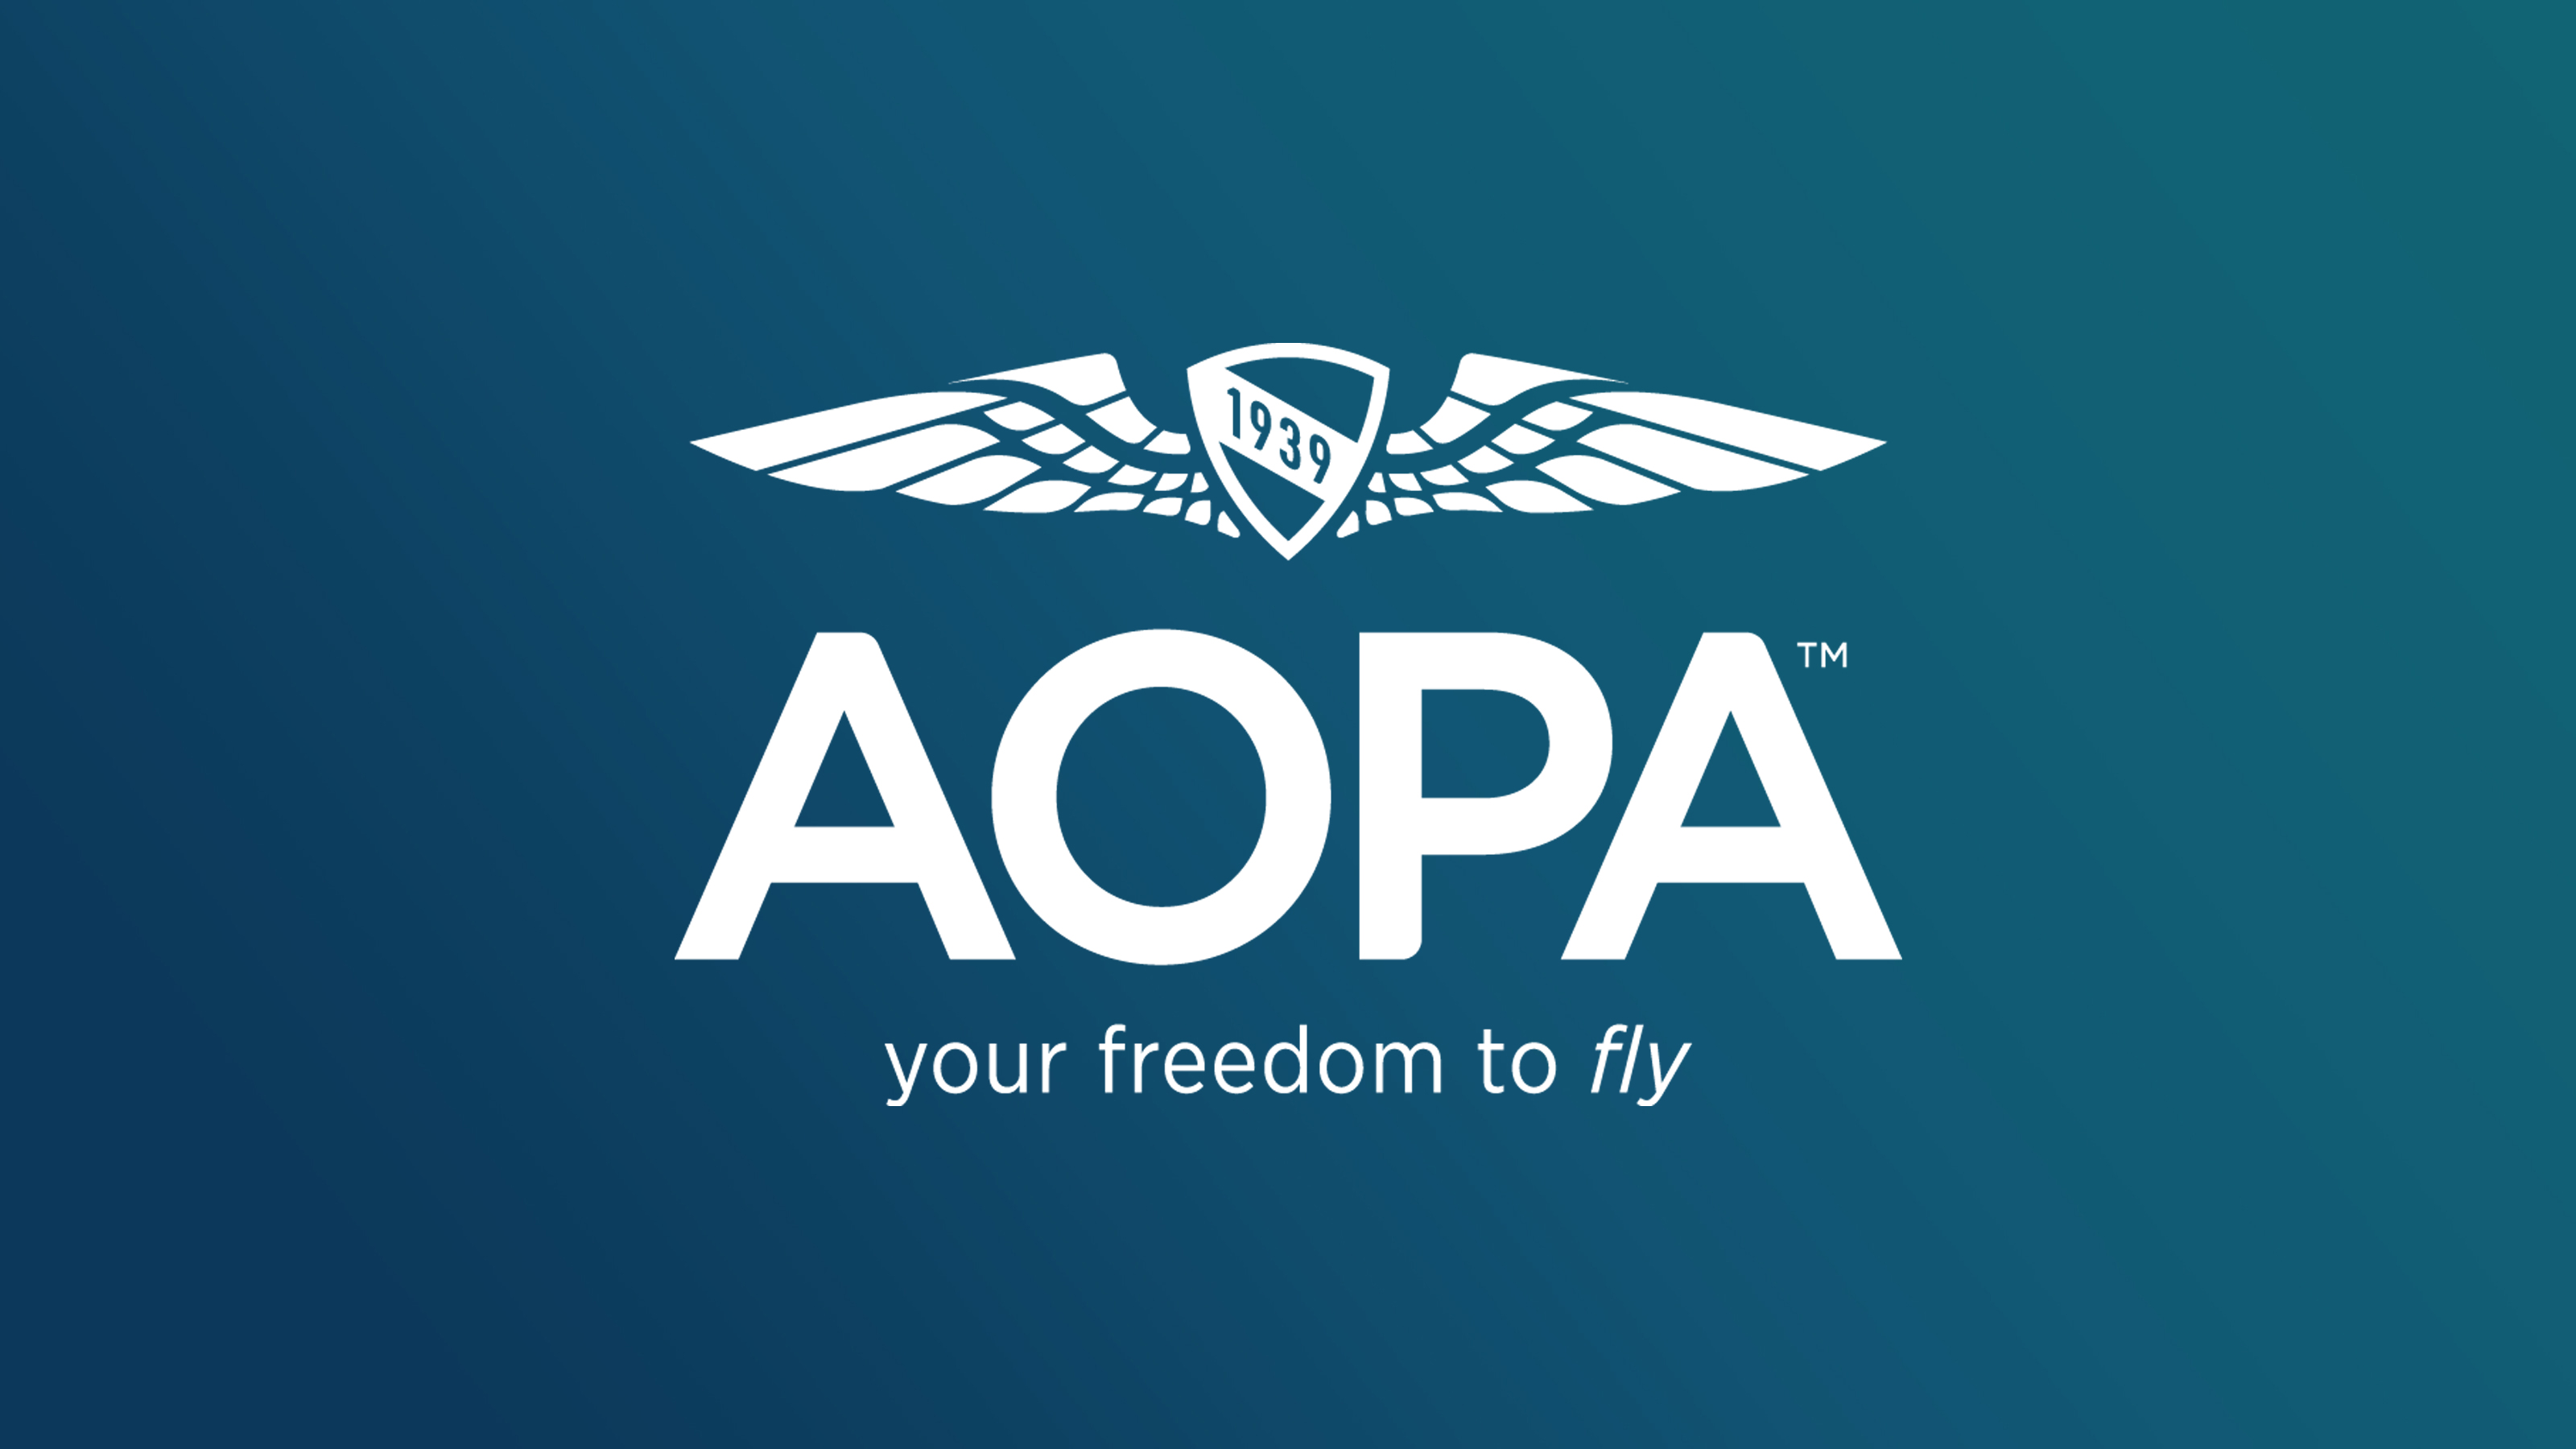 Training & Safety: Your tools to being a safer pilot - AOPA